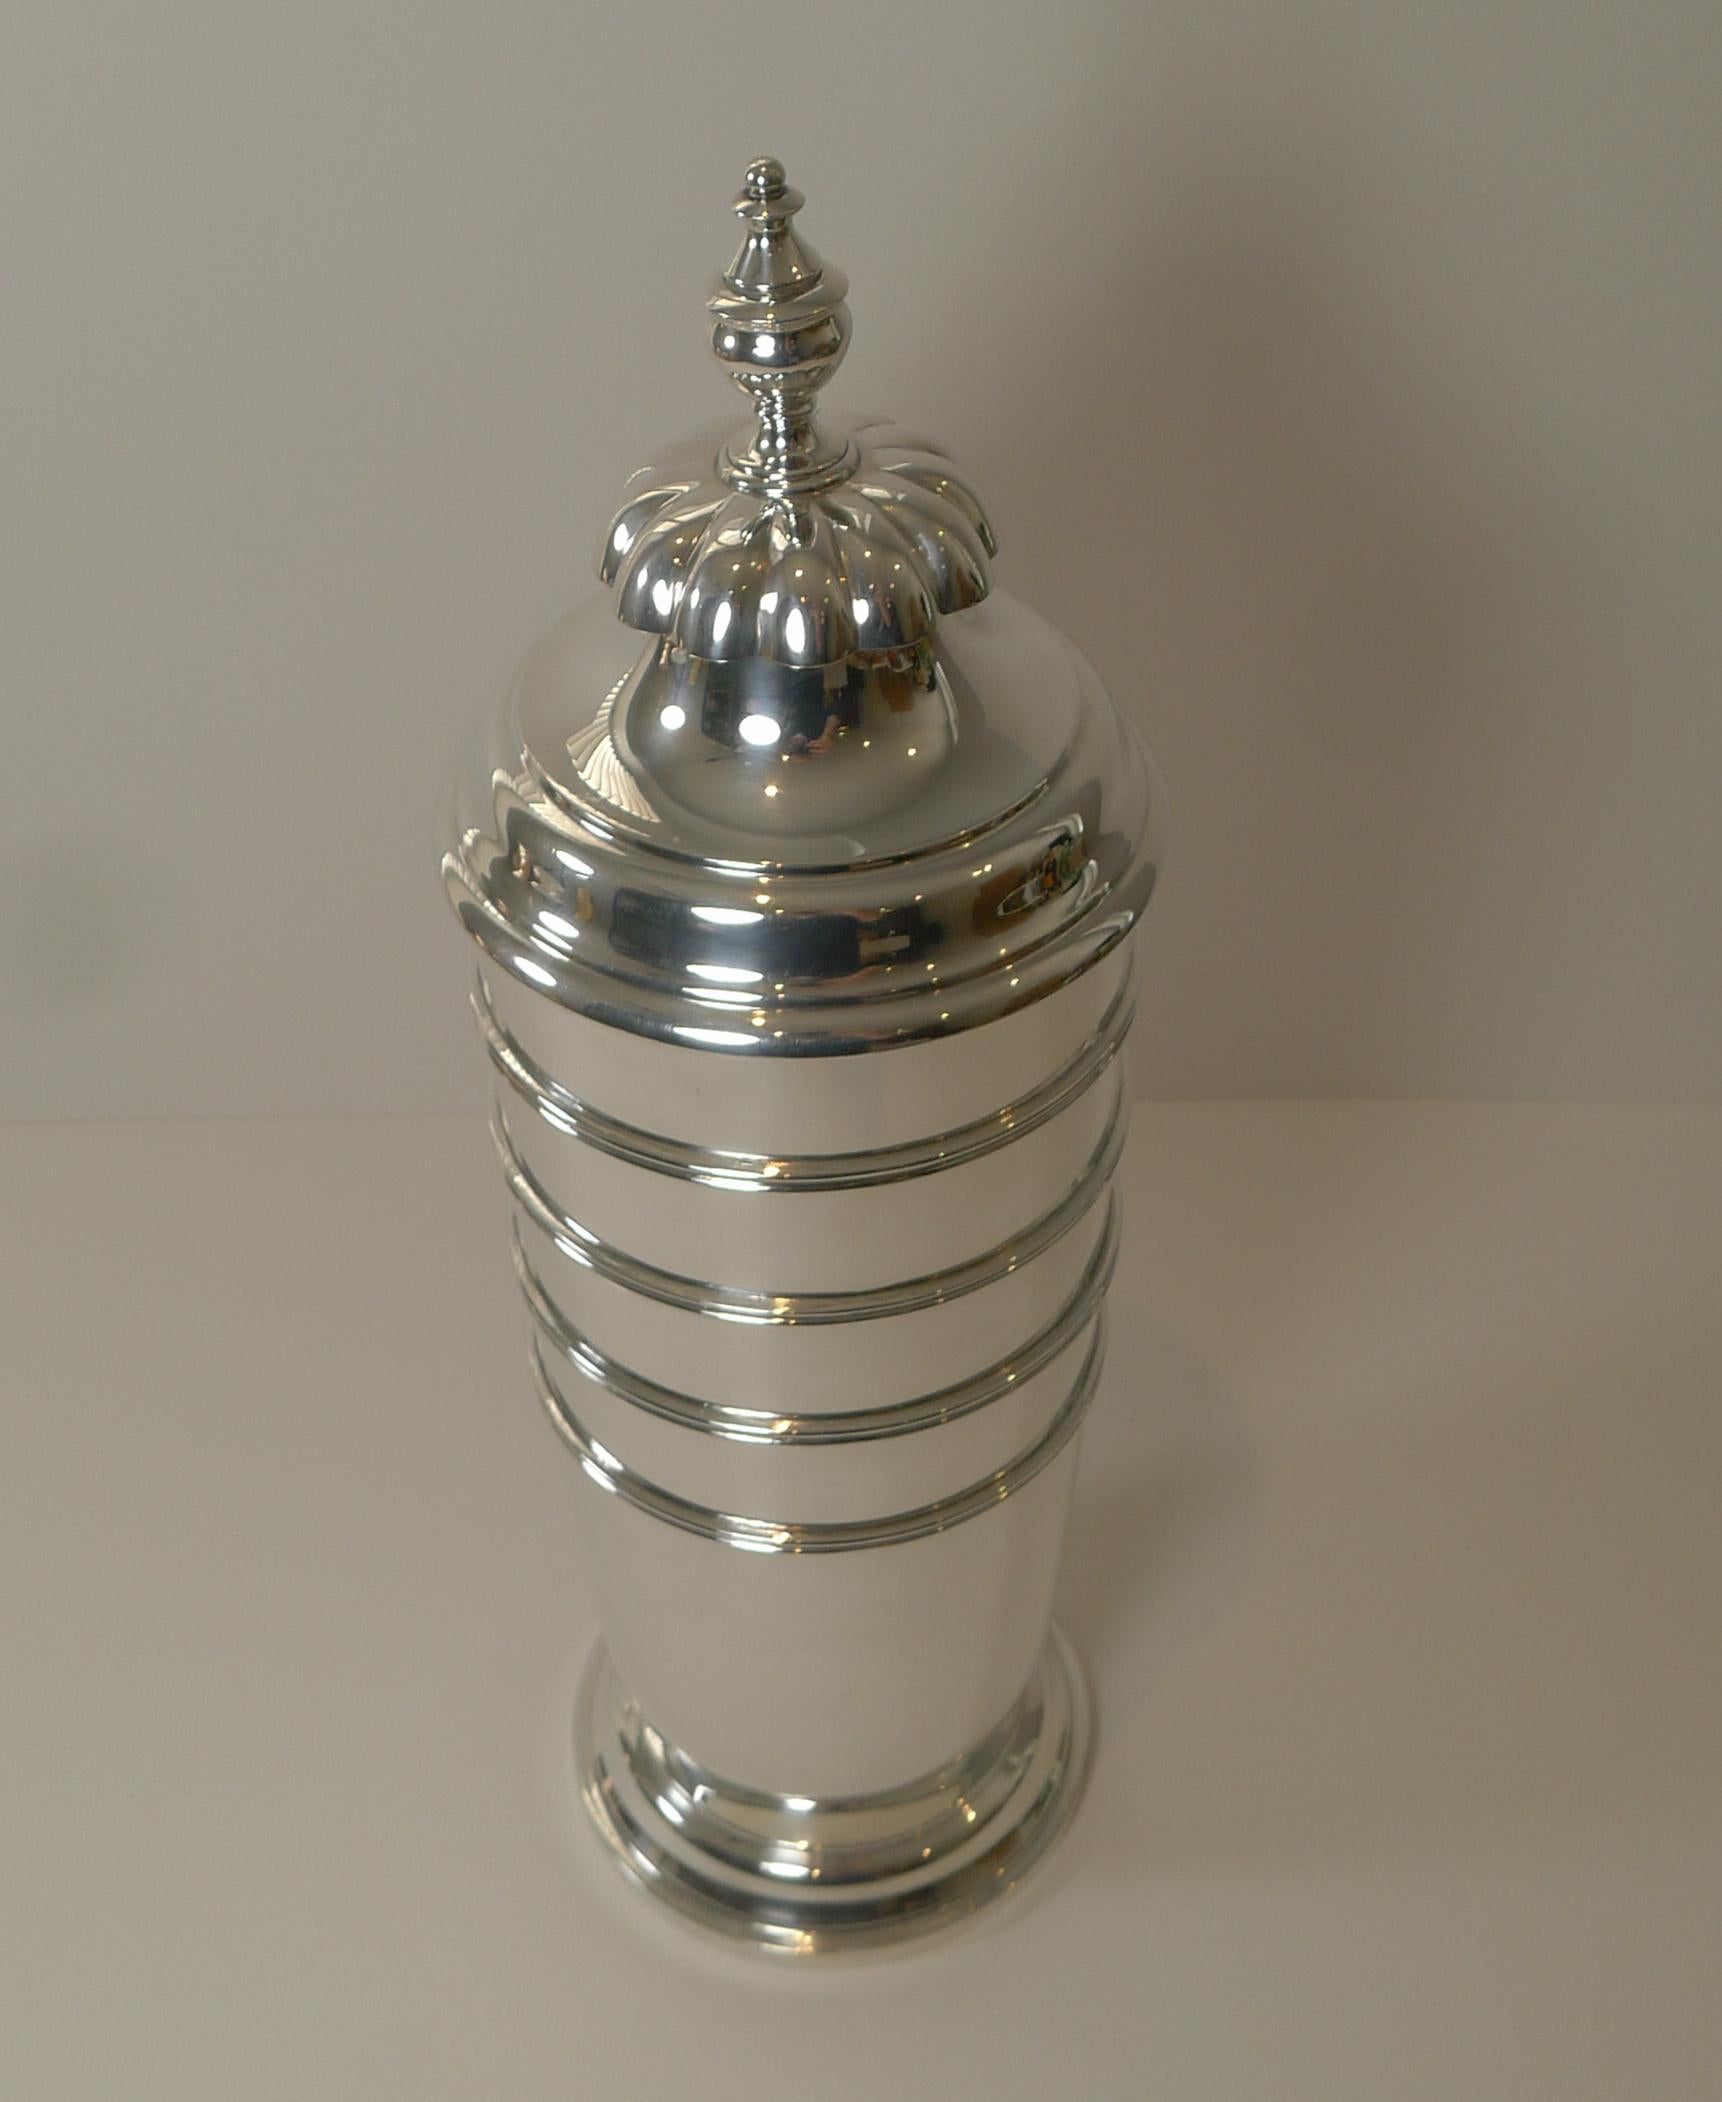 Art Deco American Sterling Silver 3 Pint Cocktail Shaker c.1945 by Tuttle For Sale